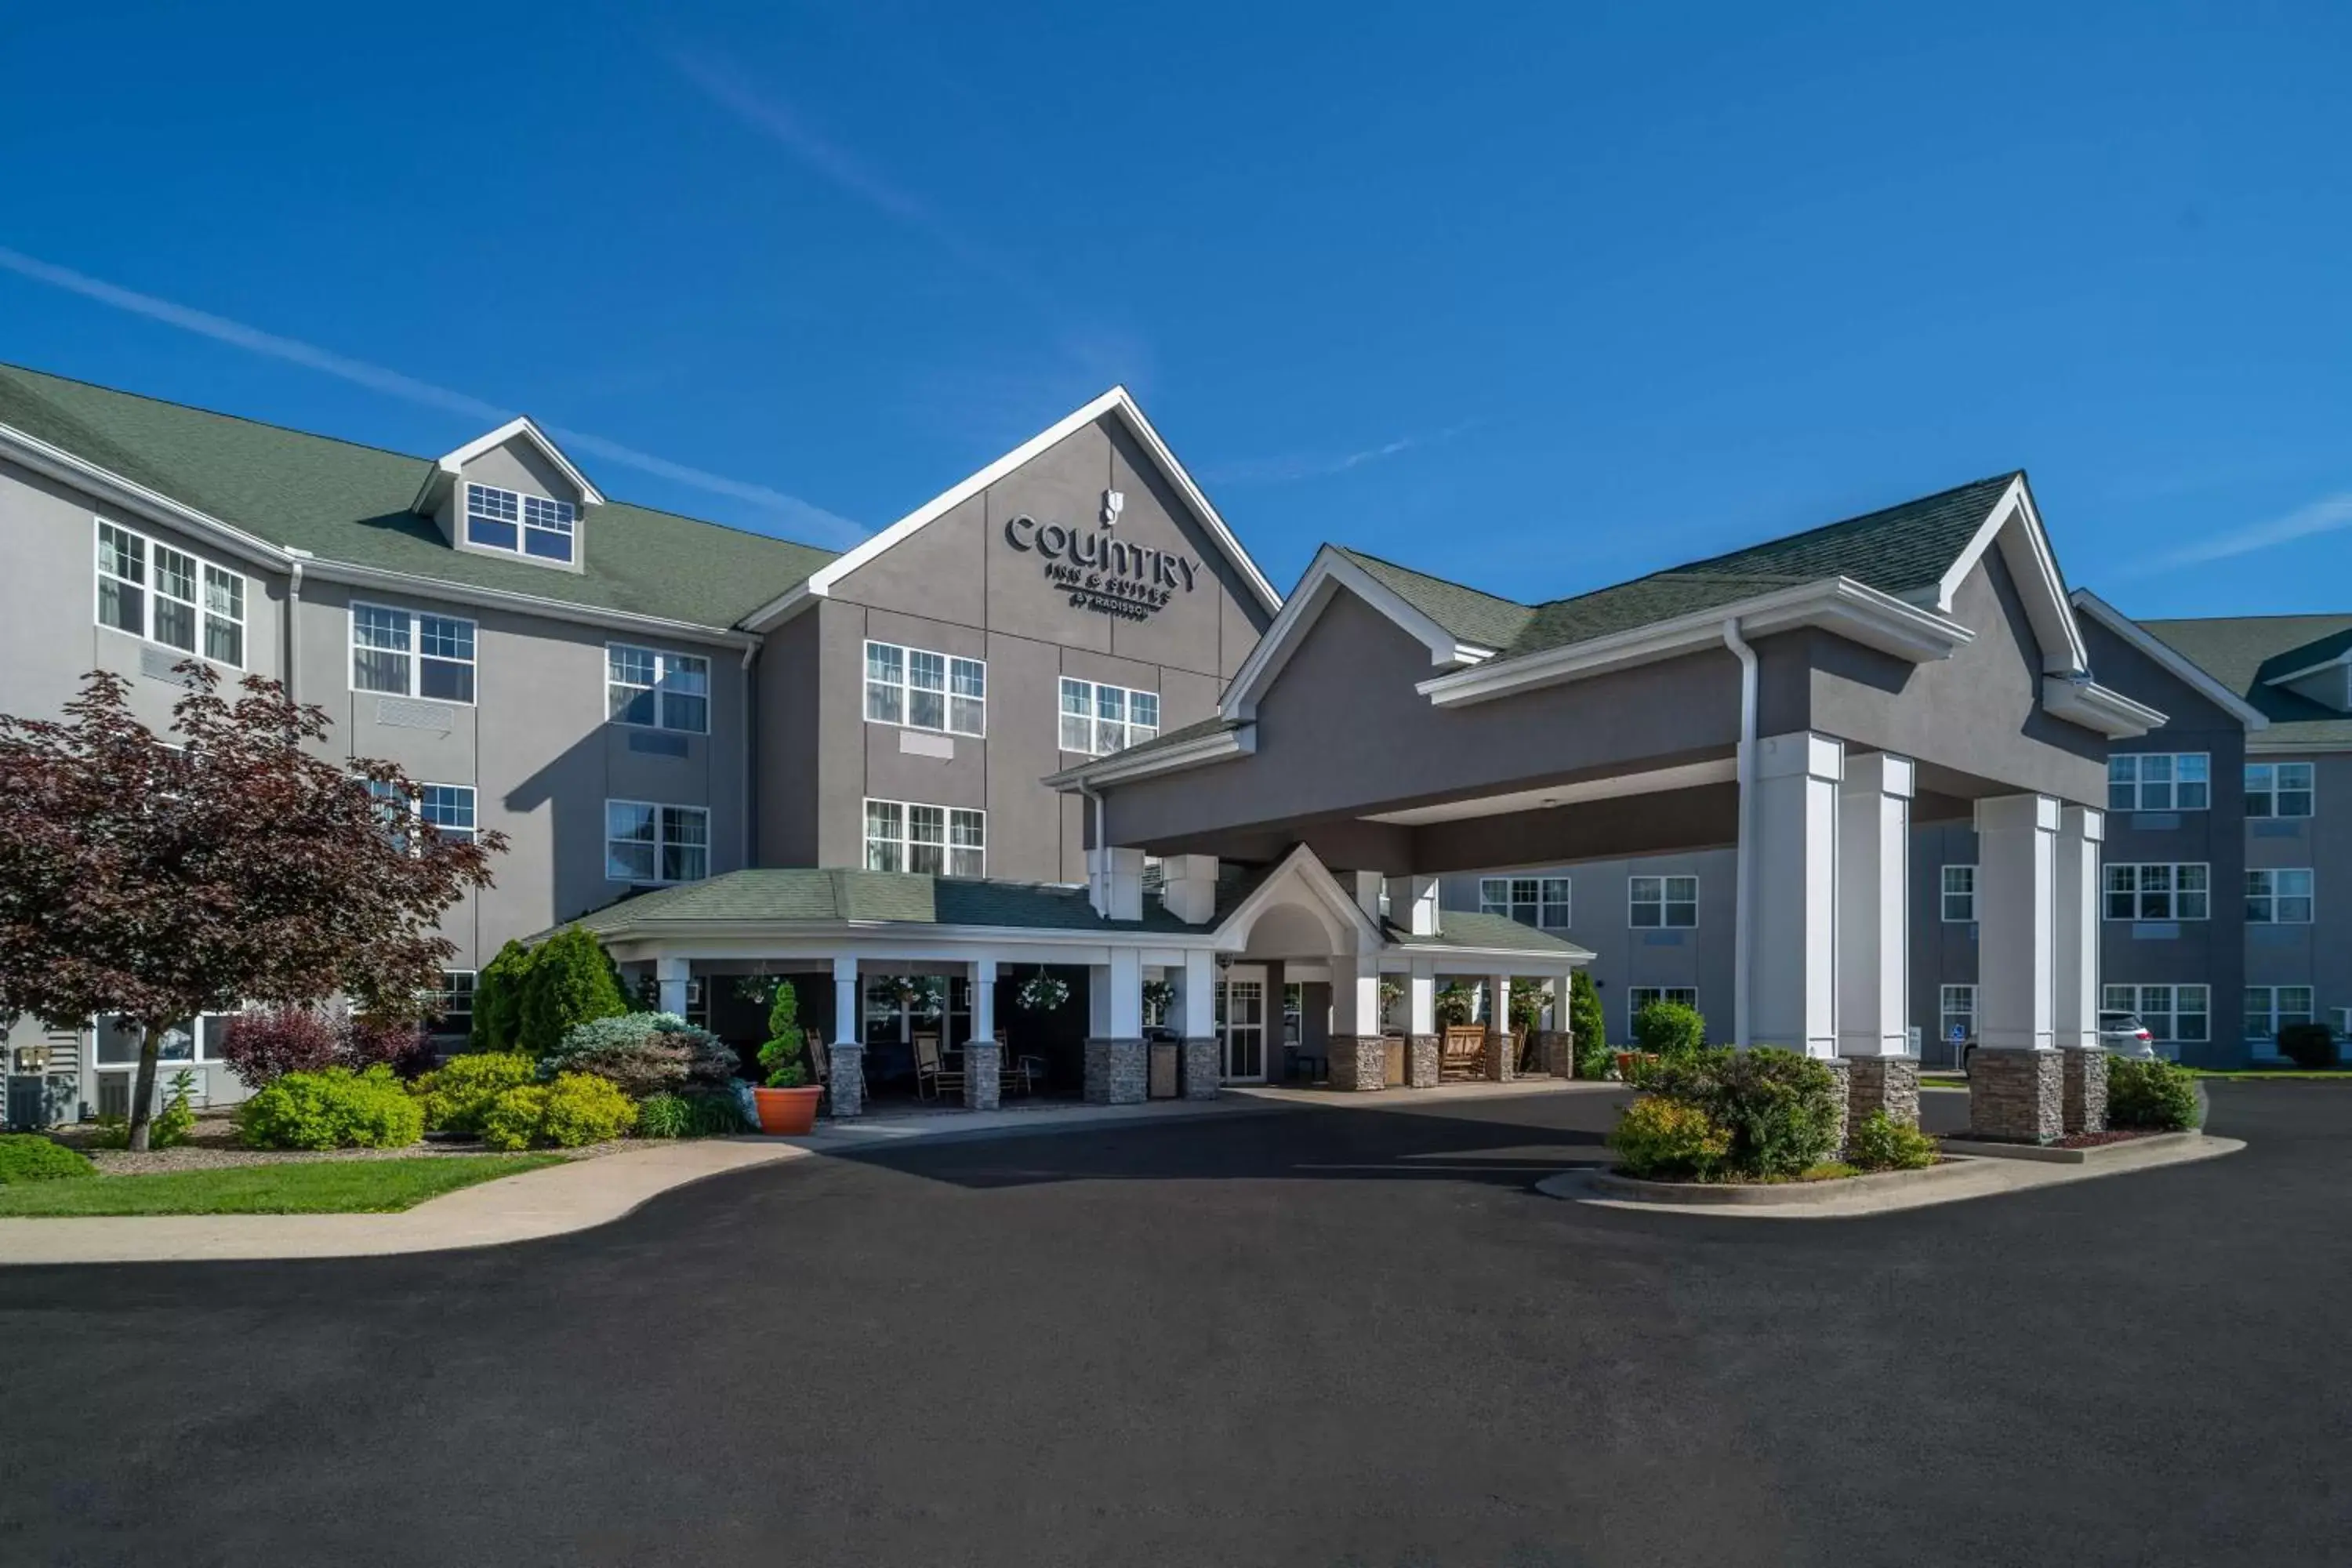 Property Building in Country Inn & Suites by Radisson, Beckley, WV